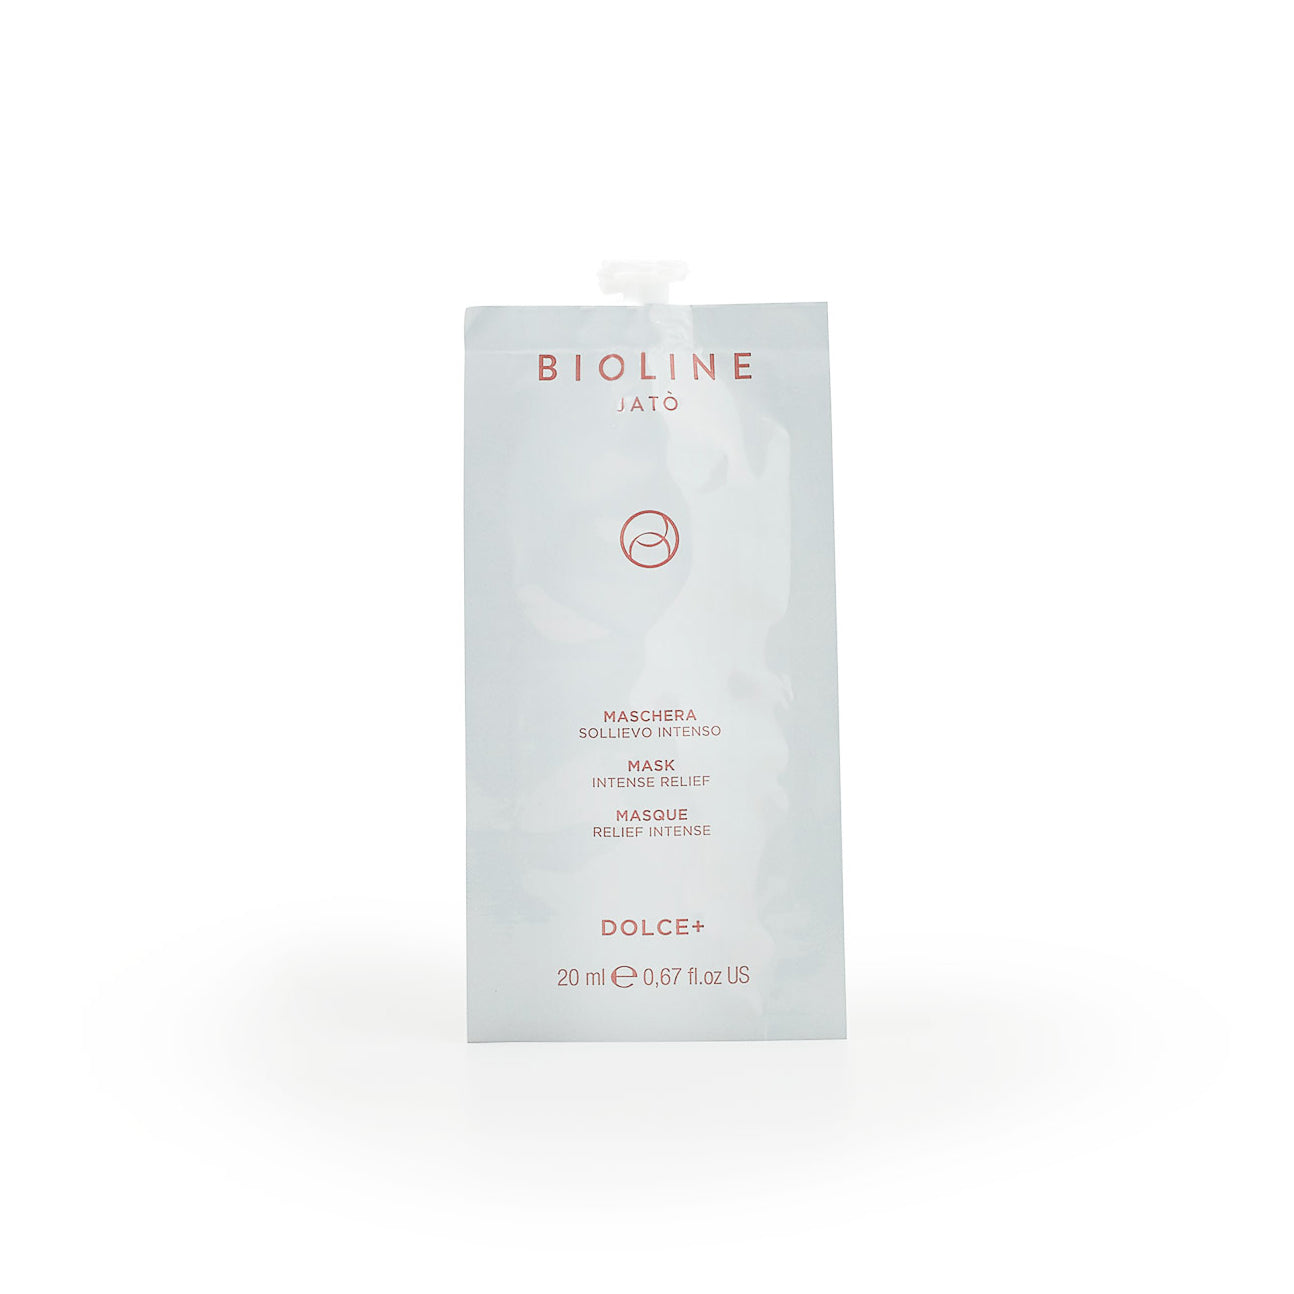 Dolce+ Intense Relief mask, 20ml